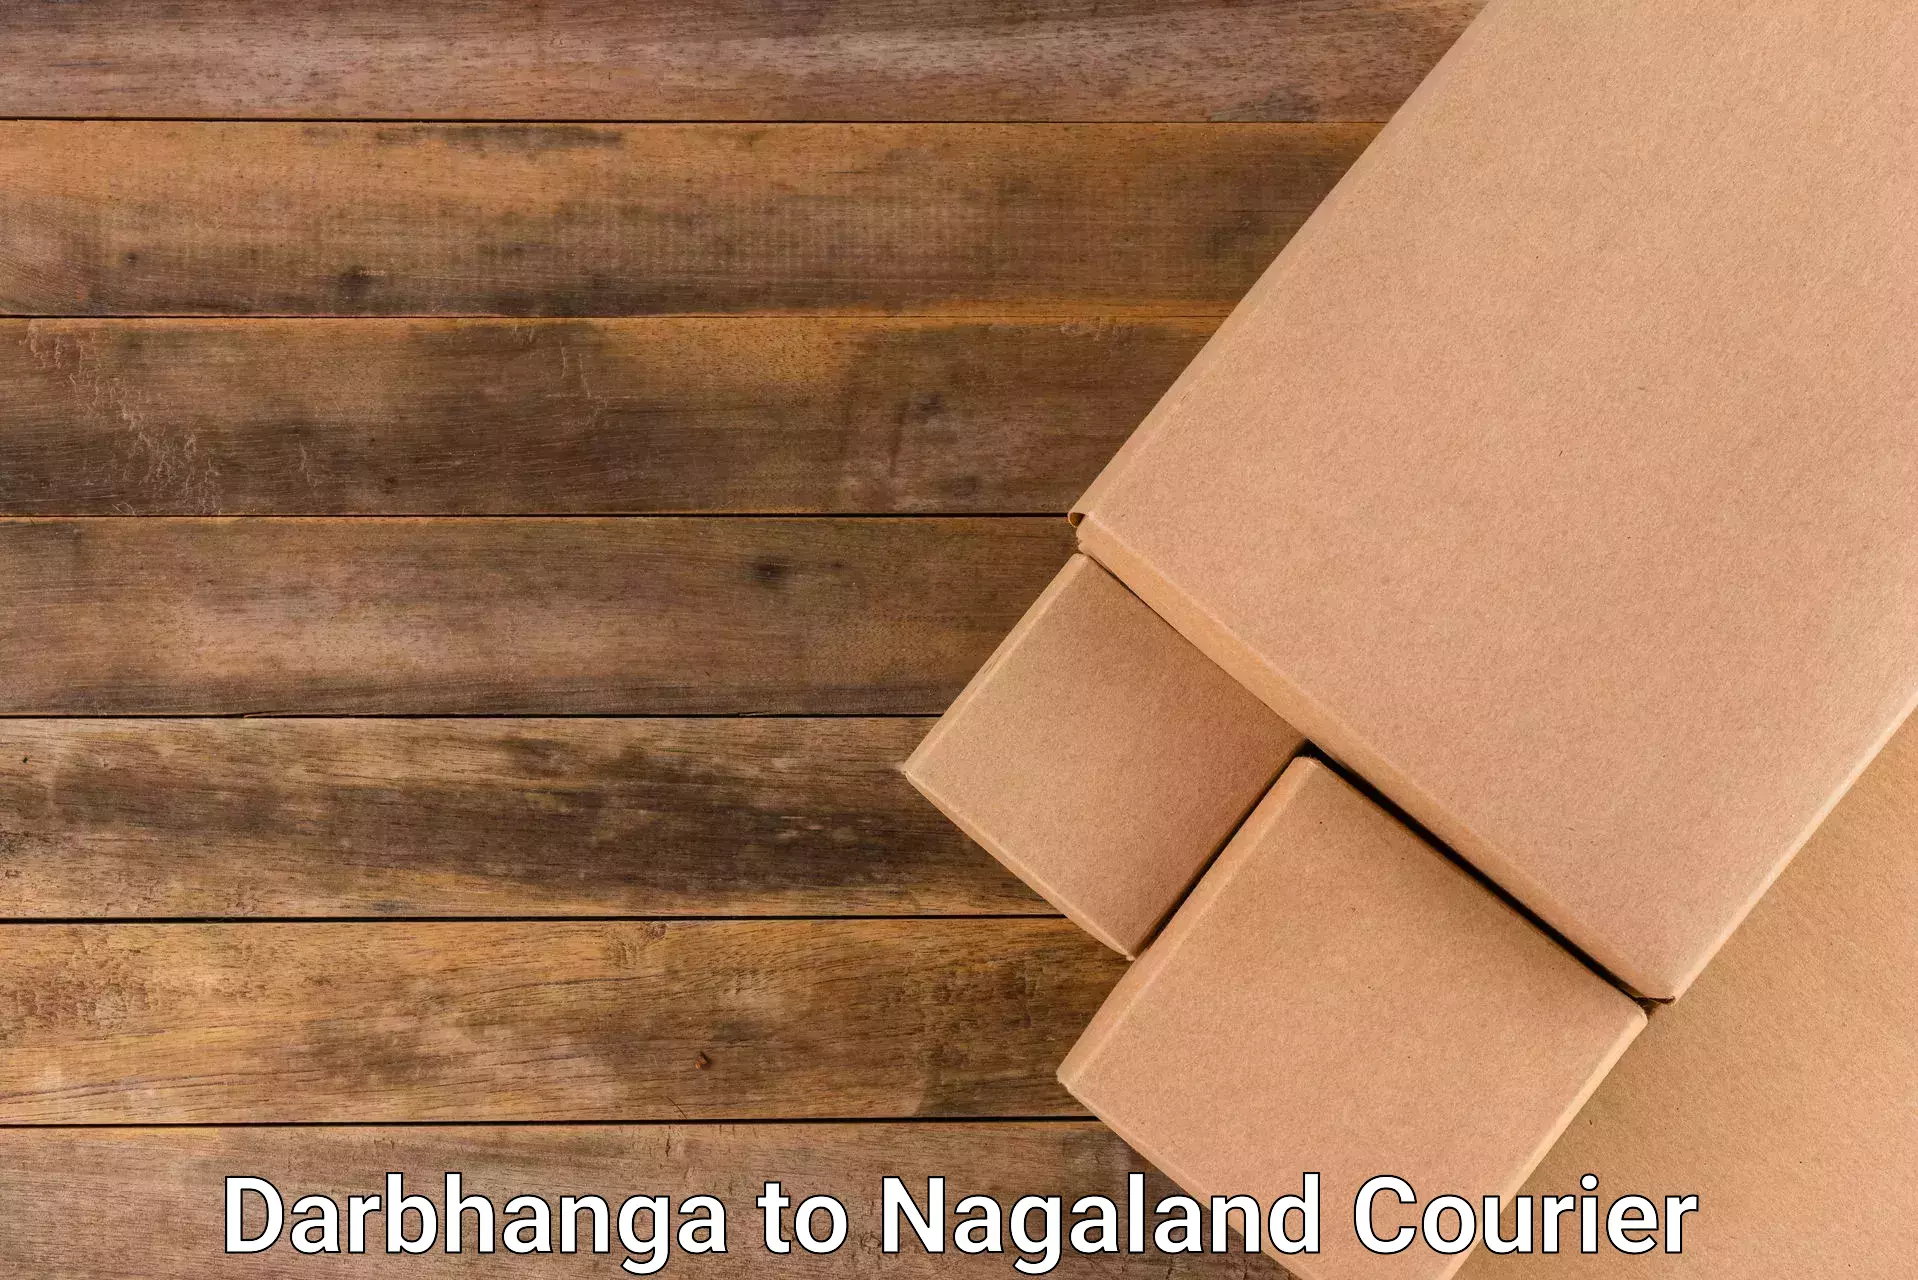 Ocean freight courier in Darbhanga to NIT Nagaland